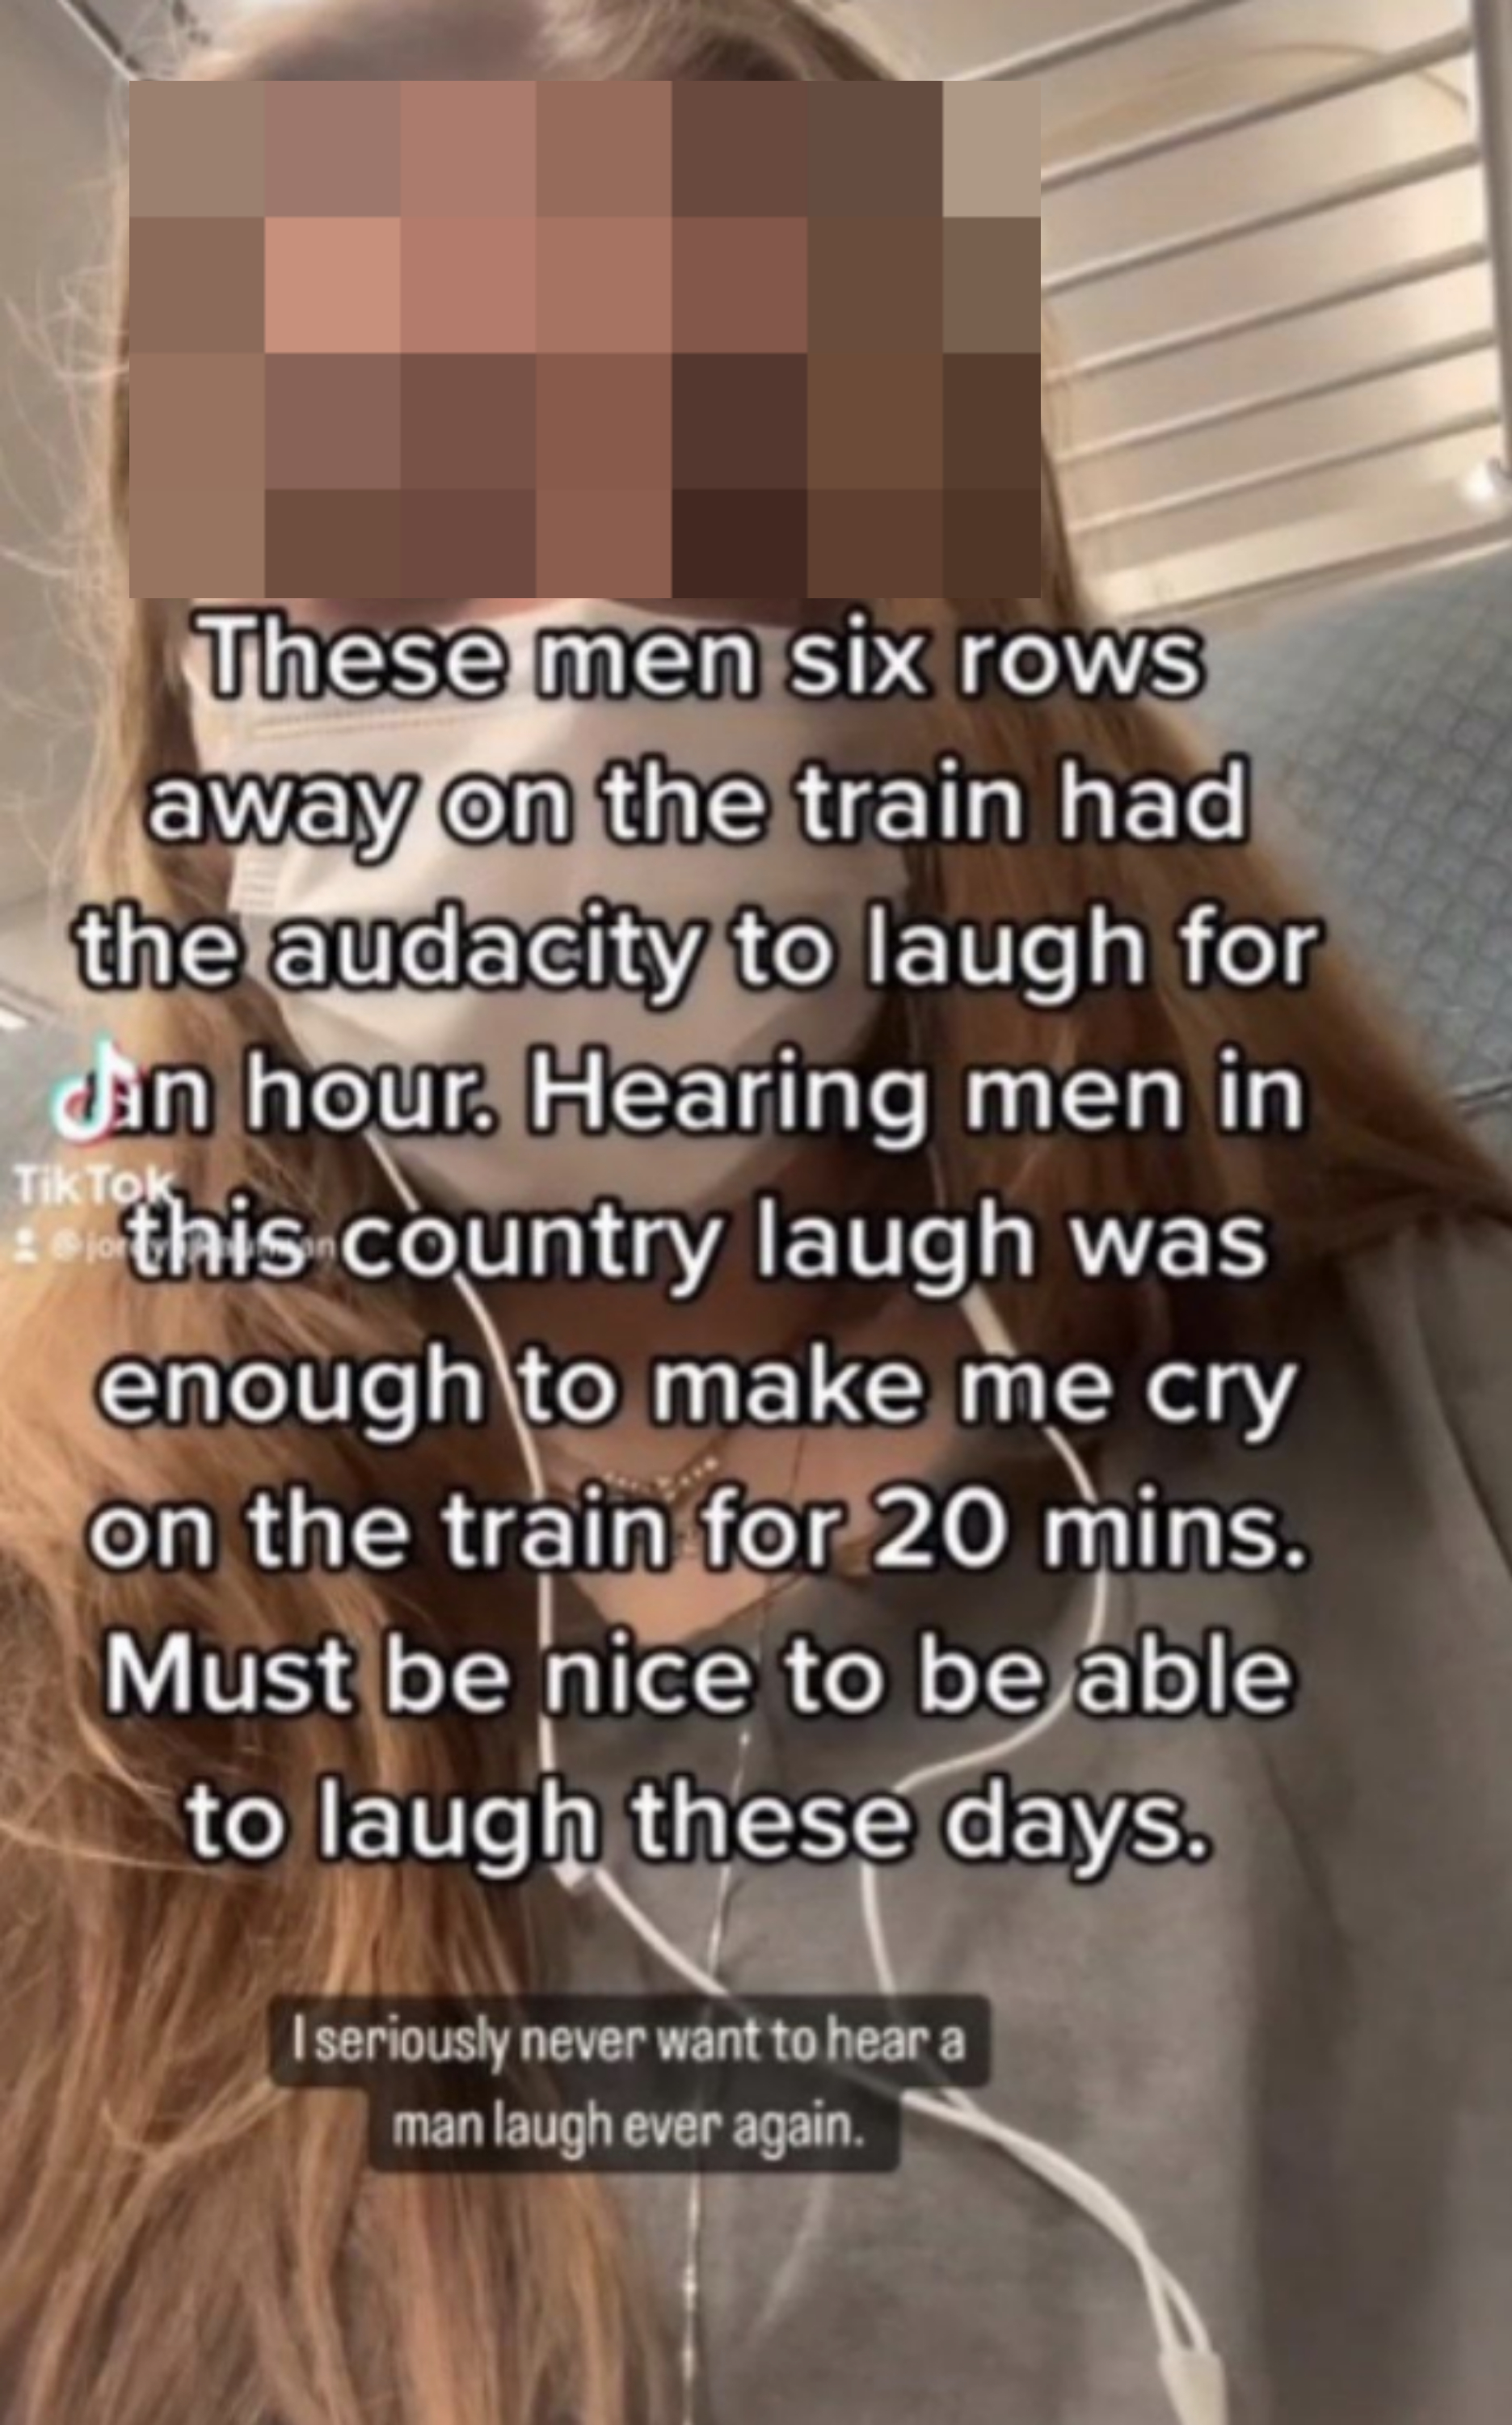 hearing men laugh in this counry was enough to make me cry on the train for 20 minutes